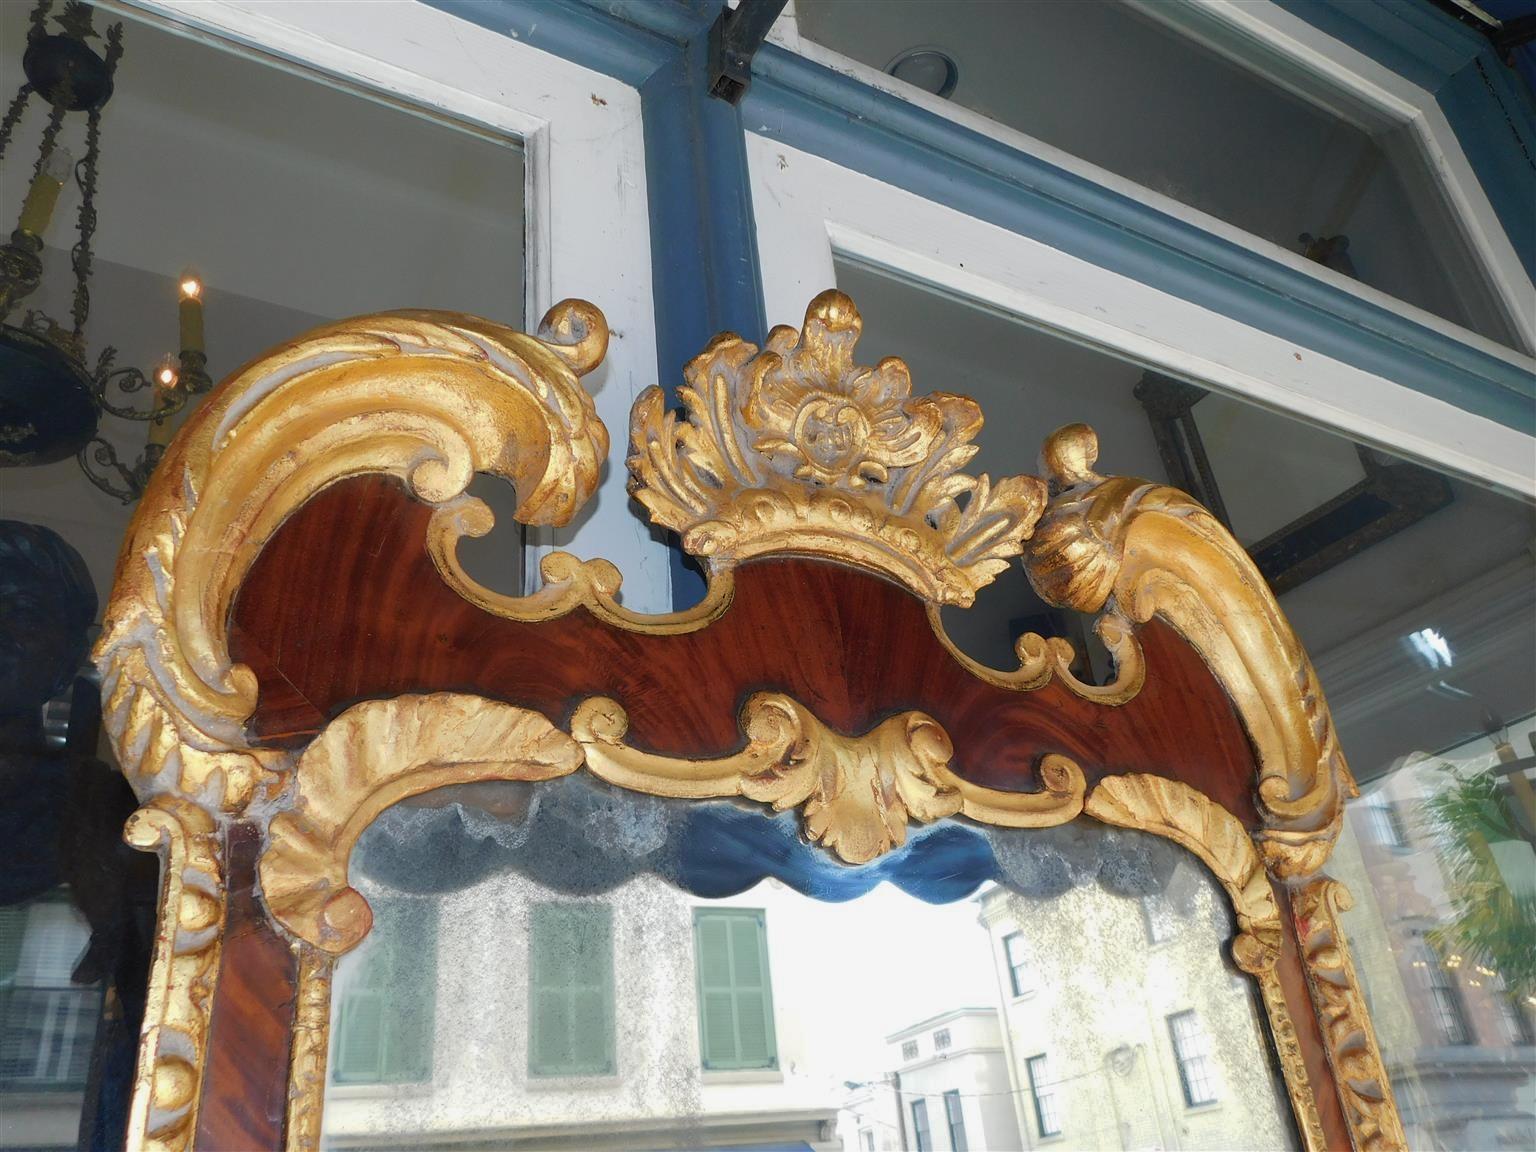 Mid-18th Century English Chippendale Mahogany Gilt Carved Wood & Gesso Floral Wall Mirror C. 1750 For Sale